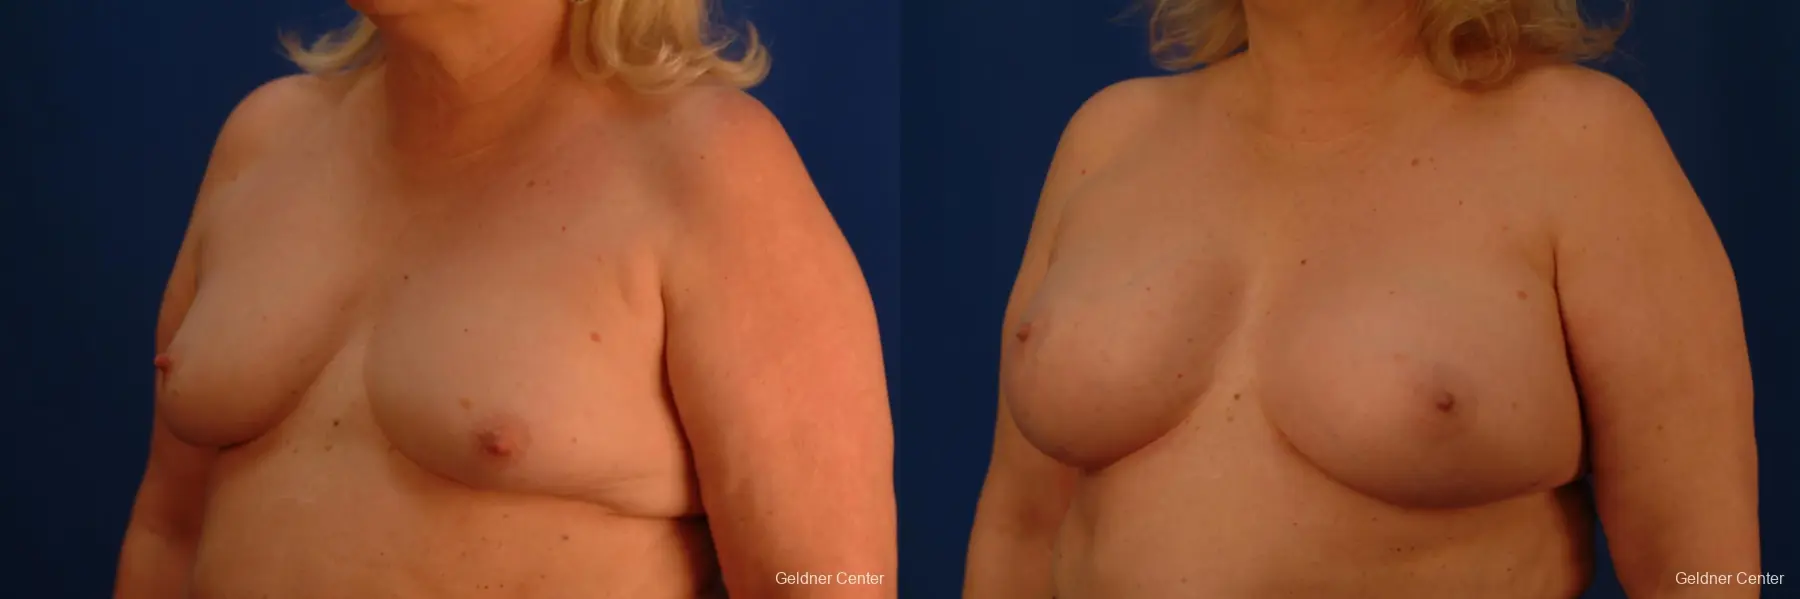 Complex Breast Augmentation Hinsdale, Chicago 2430 - Before and After 4